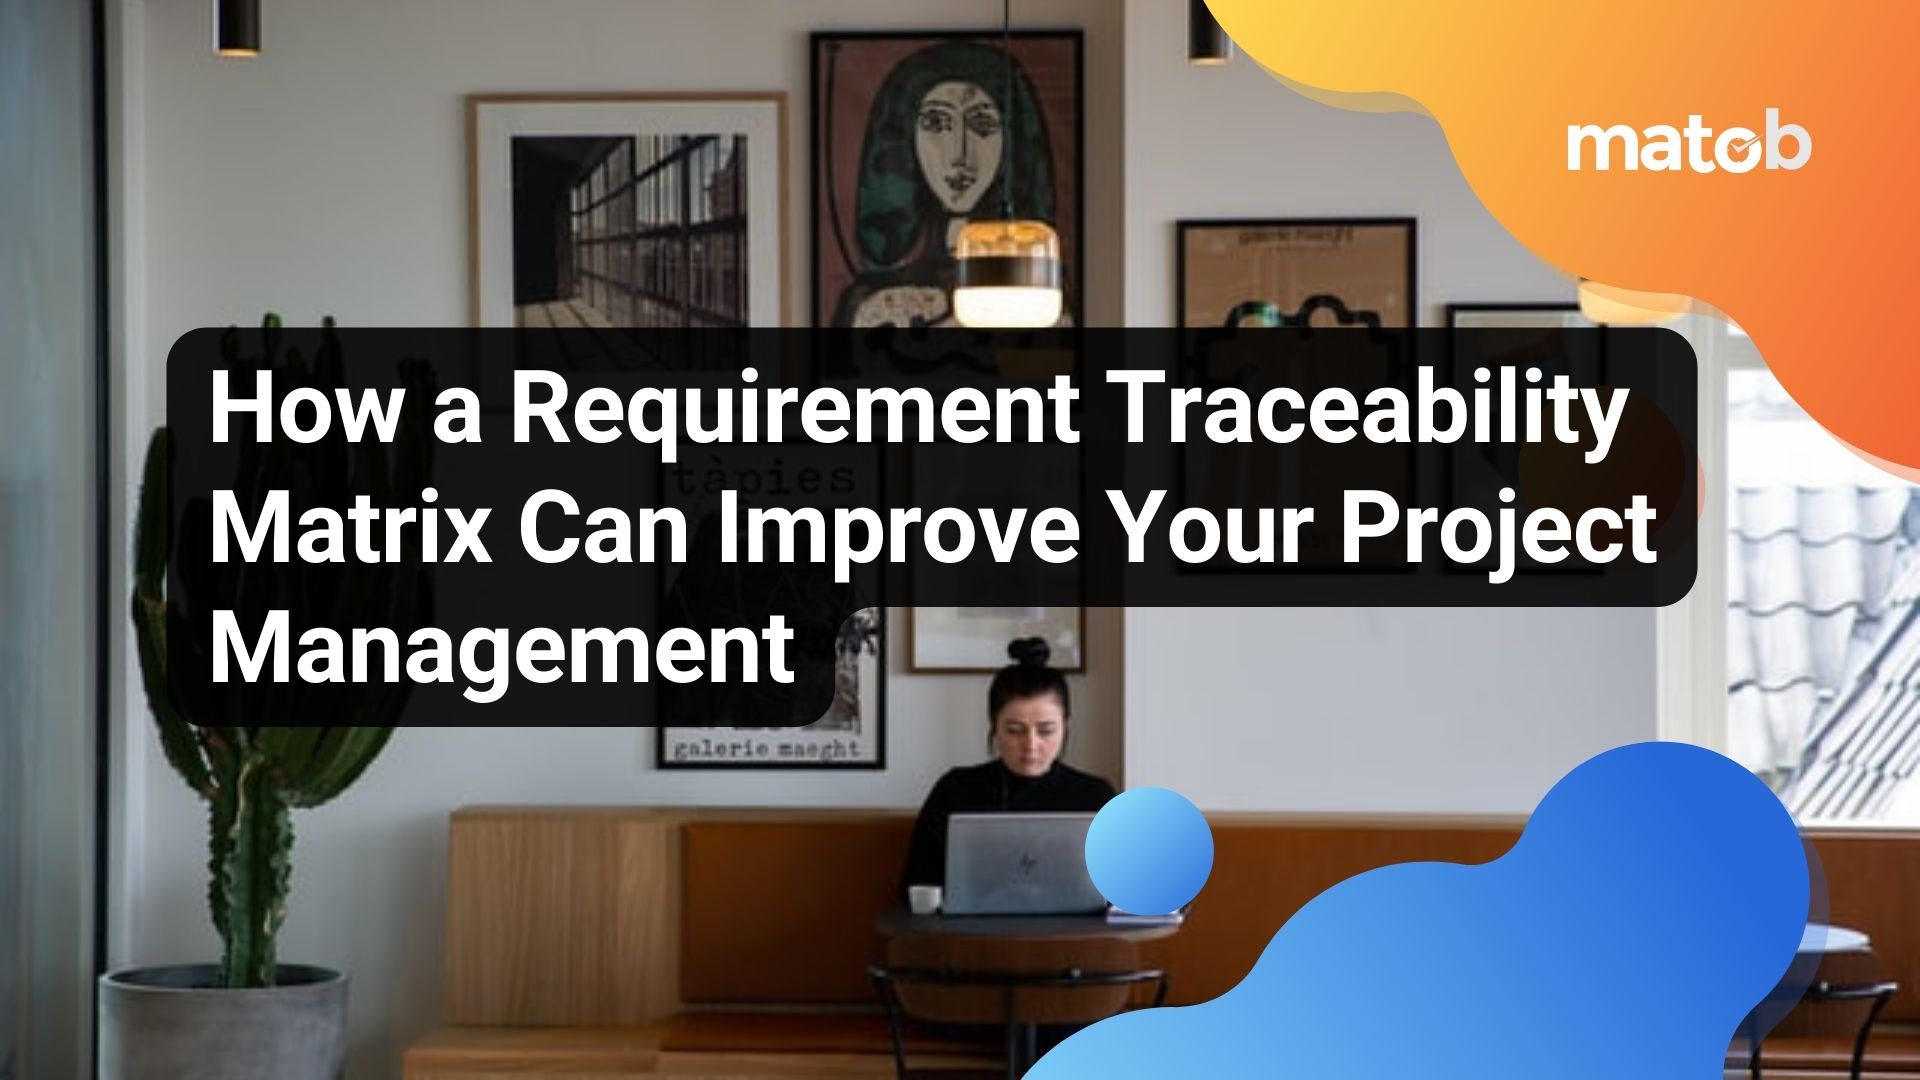 How a Requirement Traceability Matrix Can Improve Your Project Management